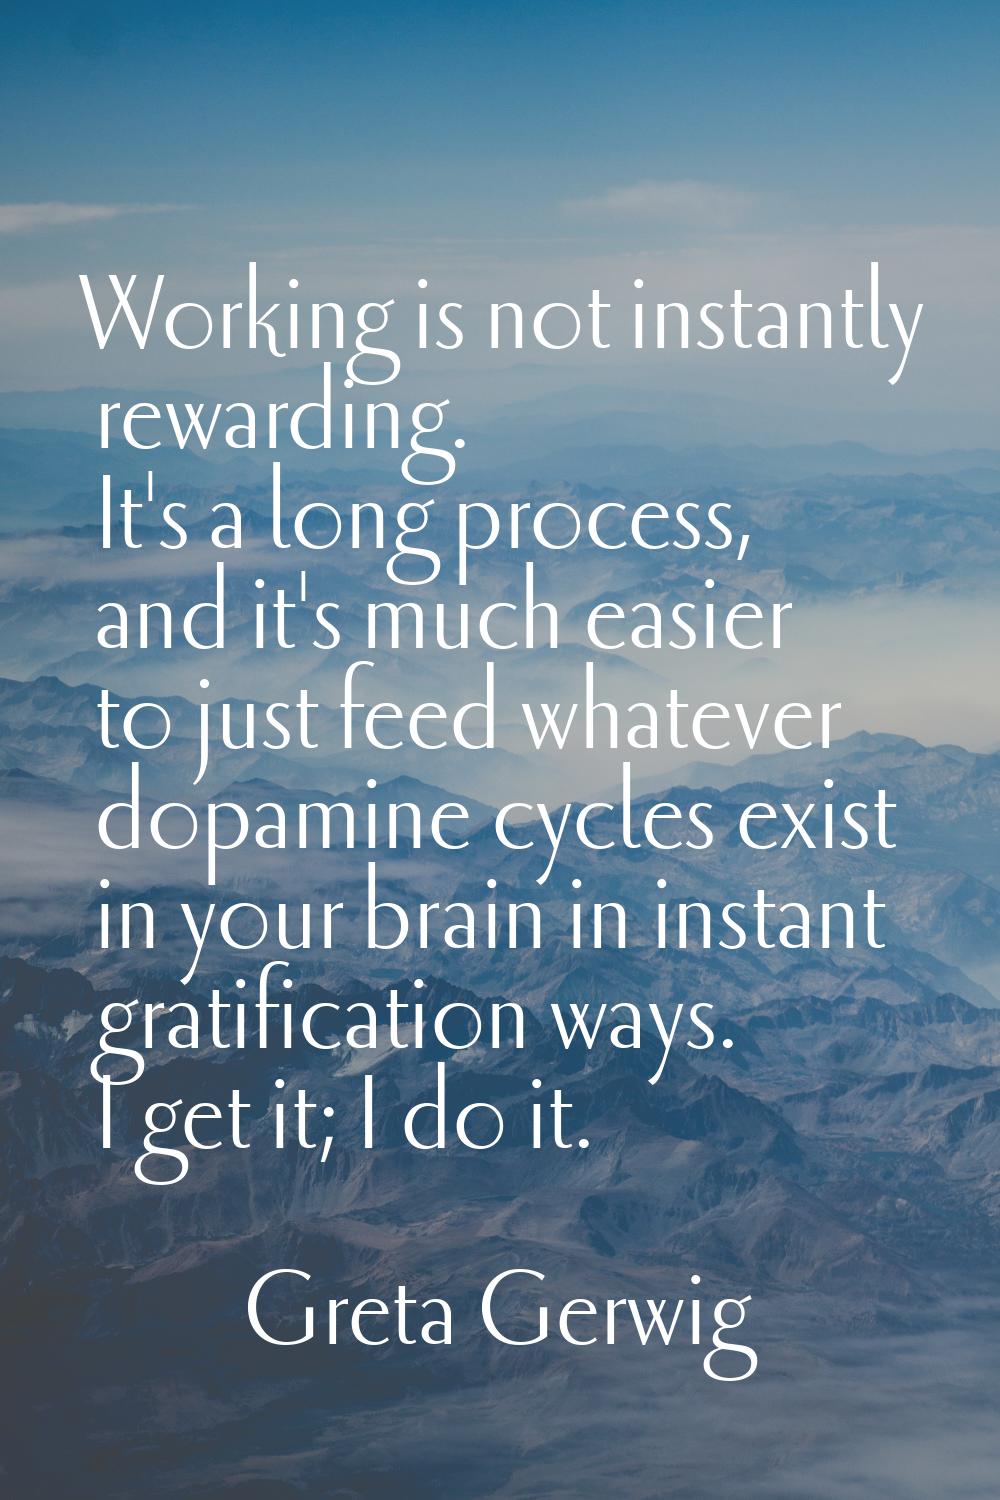 Working is not instantly rewarding. It's a long process, and it's much easier to just feed whatever